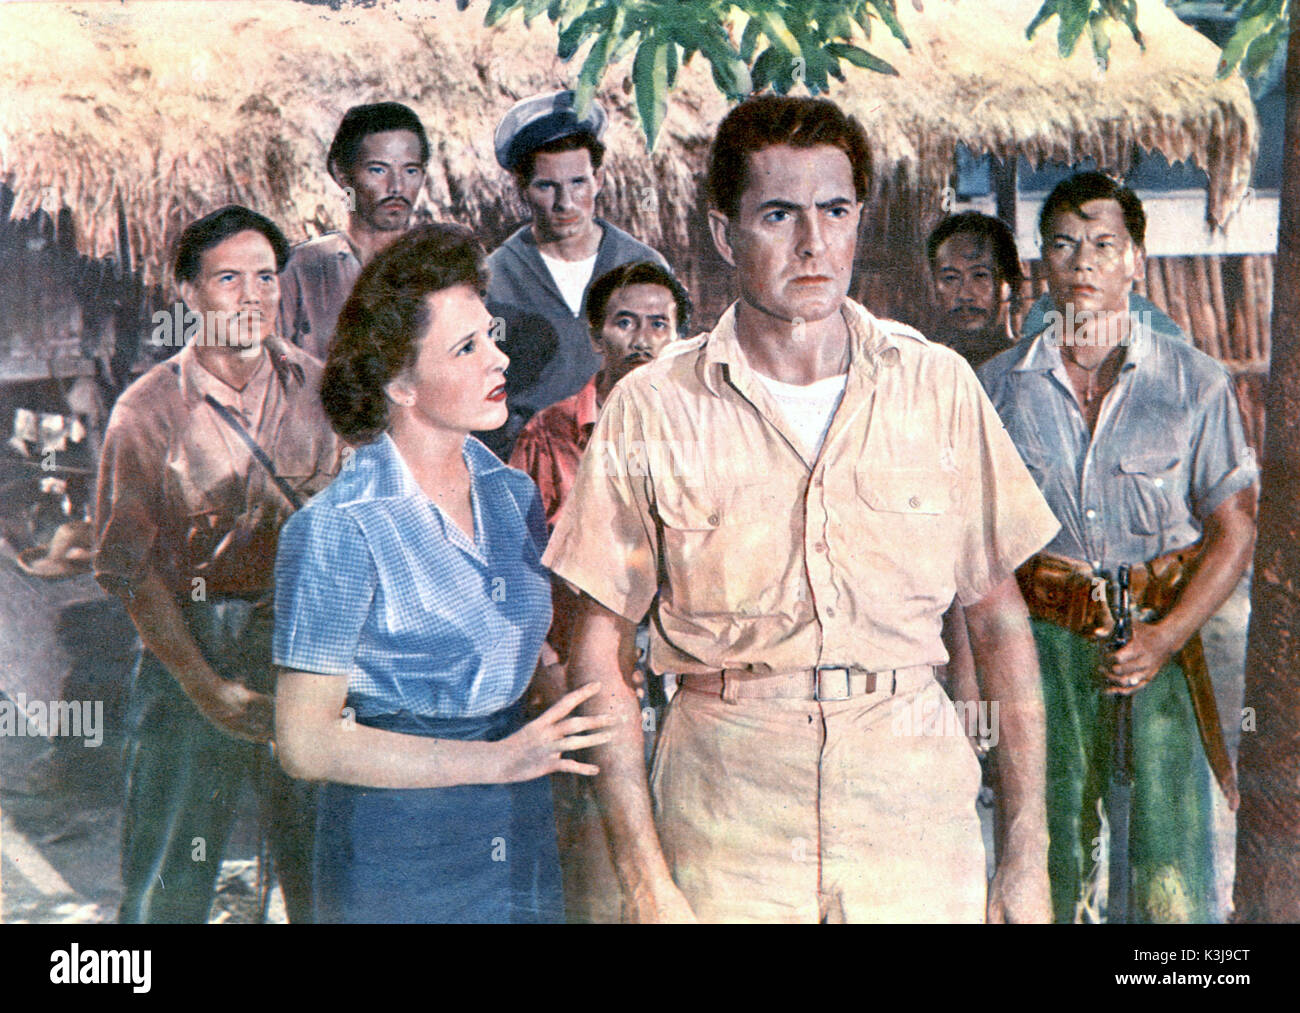 AMERICAN GUERILLA IN THE PHILIPPINES  MICELINE PRESLE, TYRONE POWER AMERICAN GUERILLA IN THE PHILIPPINES [US 1950] [BR Title] - I SHALL RETURN MICELINE PRESLE, TYRONE POWER Stock Photo